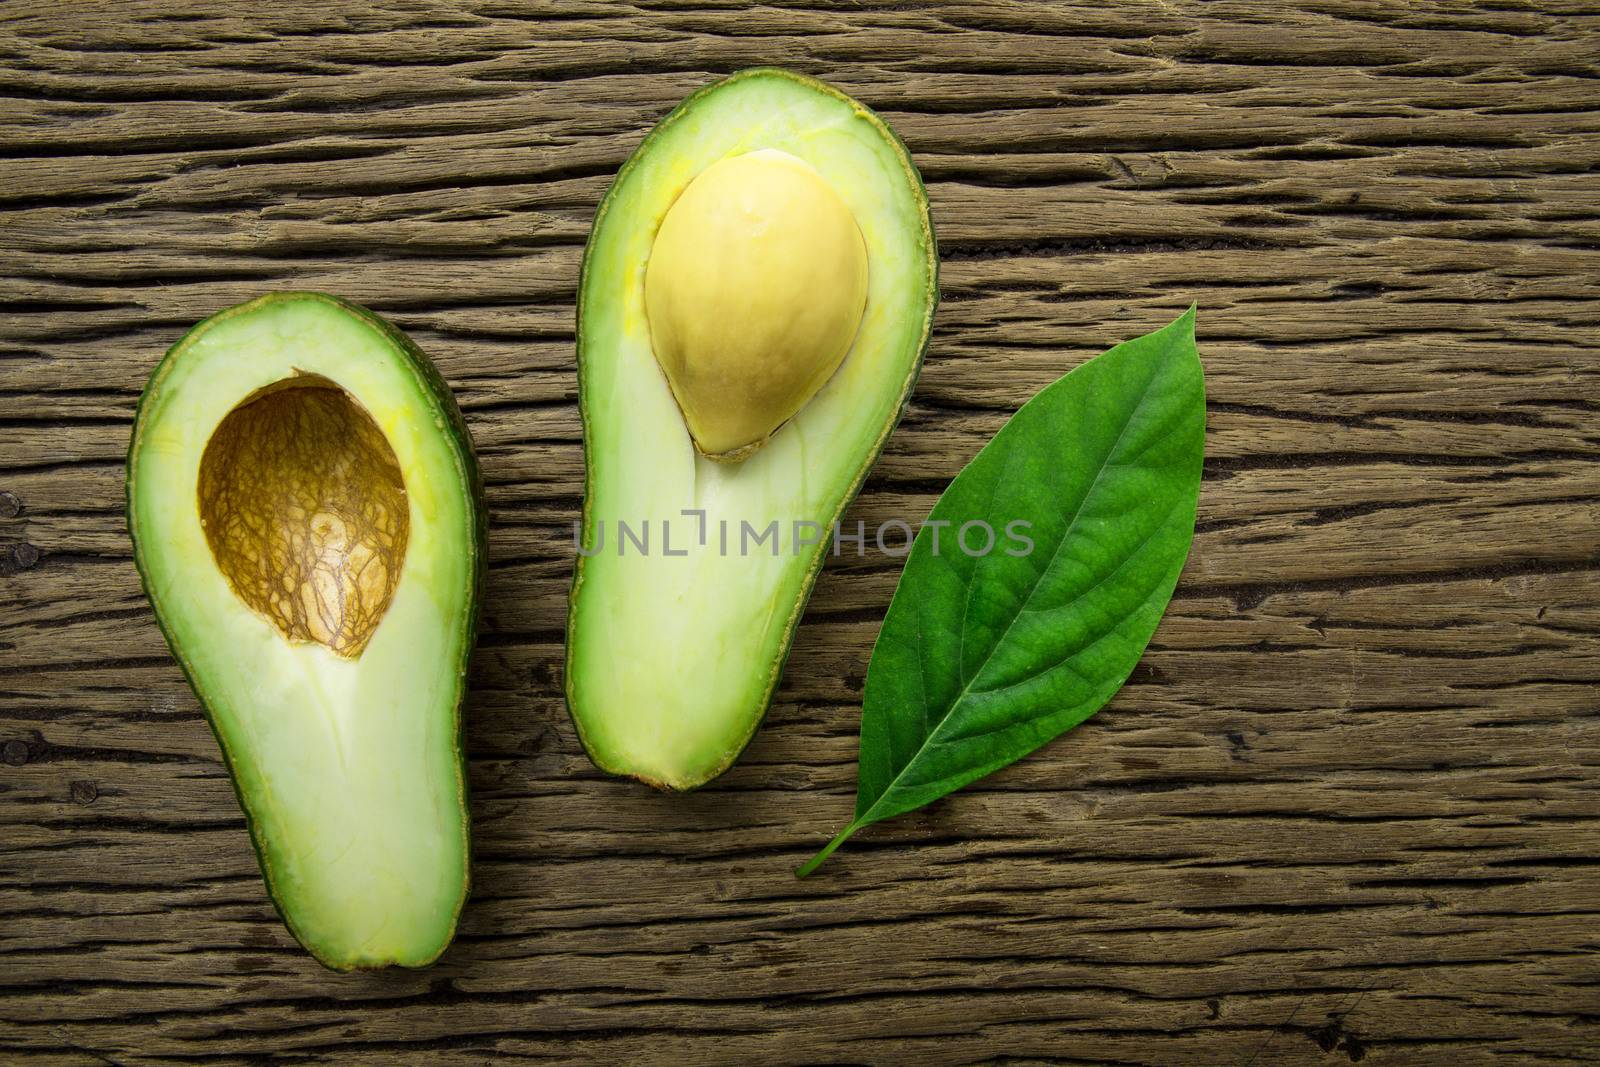 Avocado on a brown wood background.